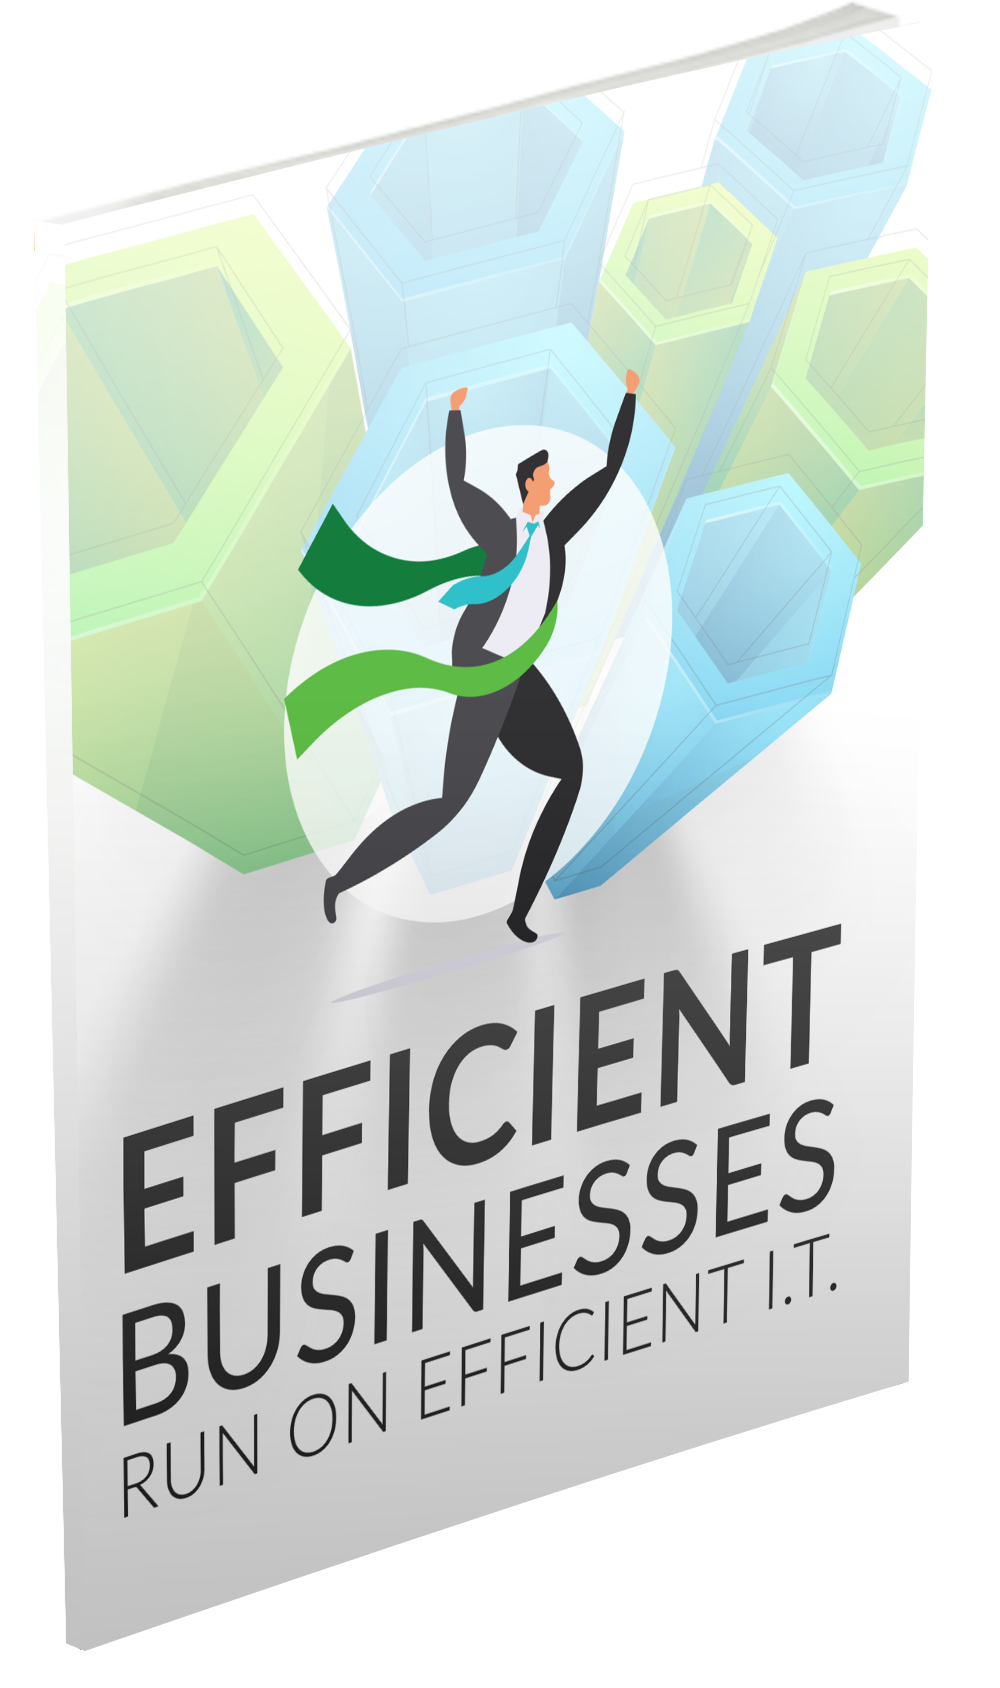 Efficient Businesses eBook - Aws Management Services - Managing Google Storage - STG IT Service Company in Los Angeles CA